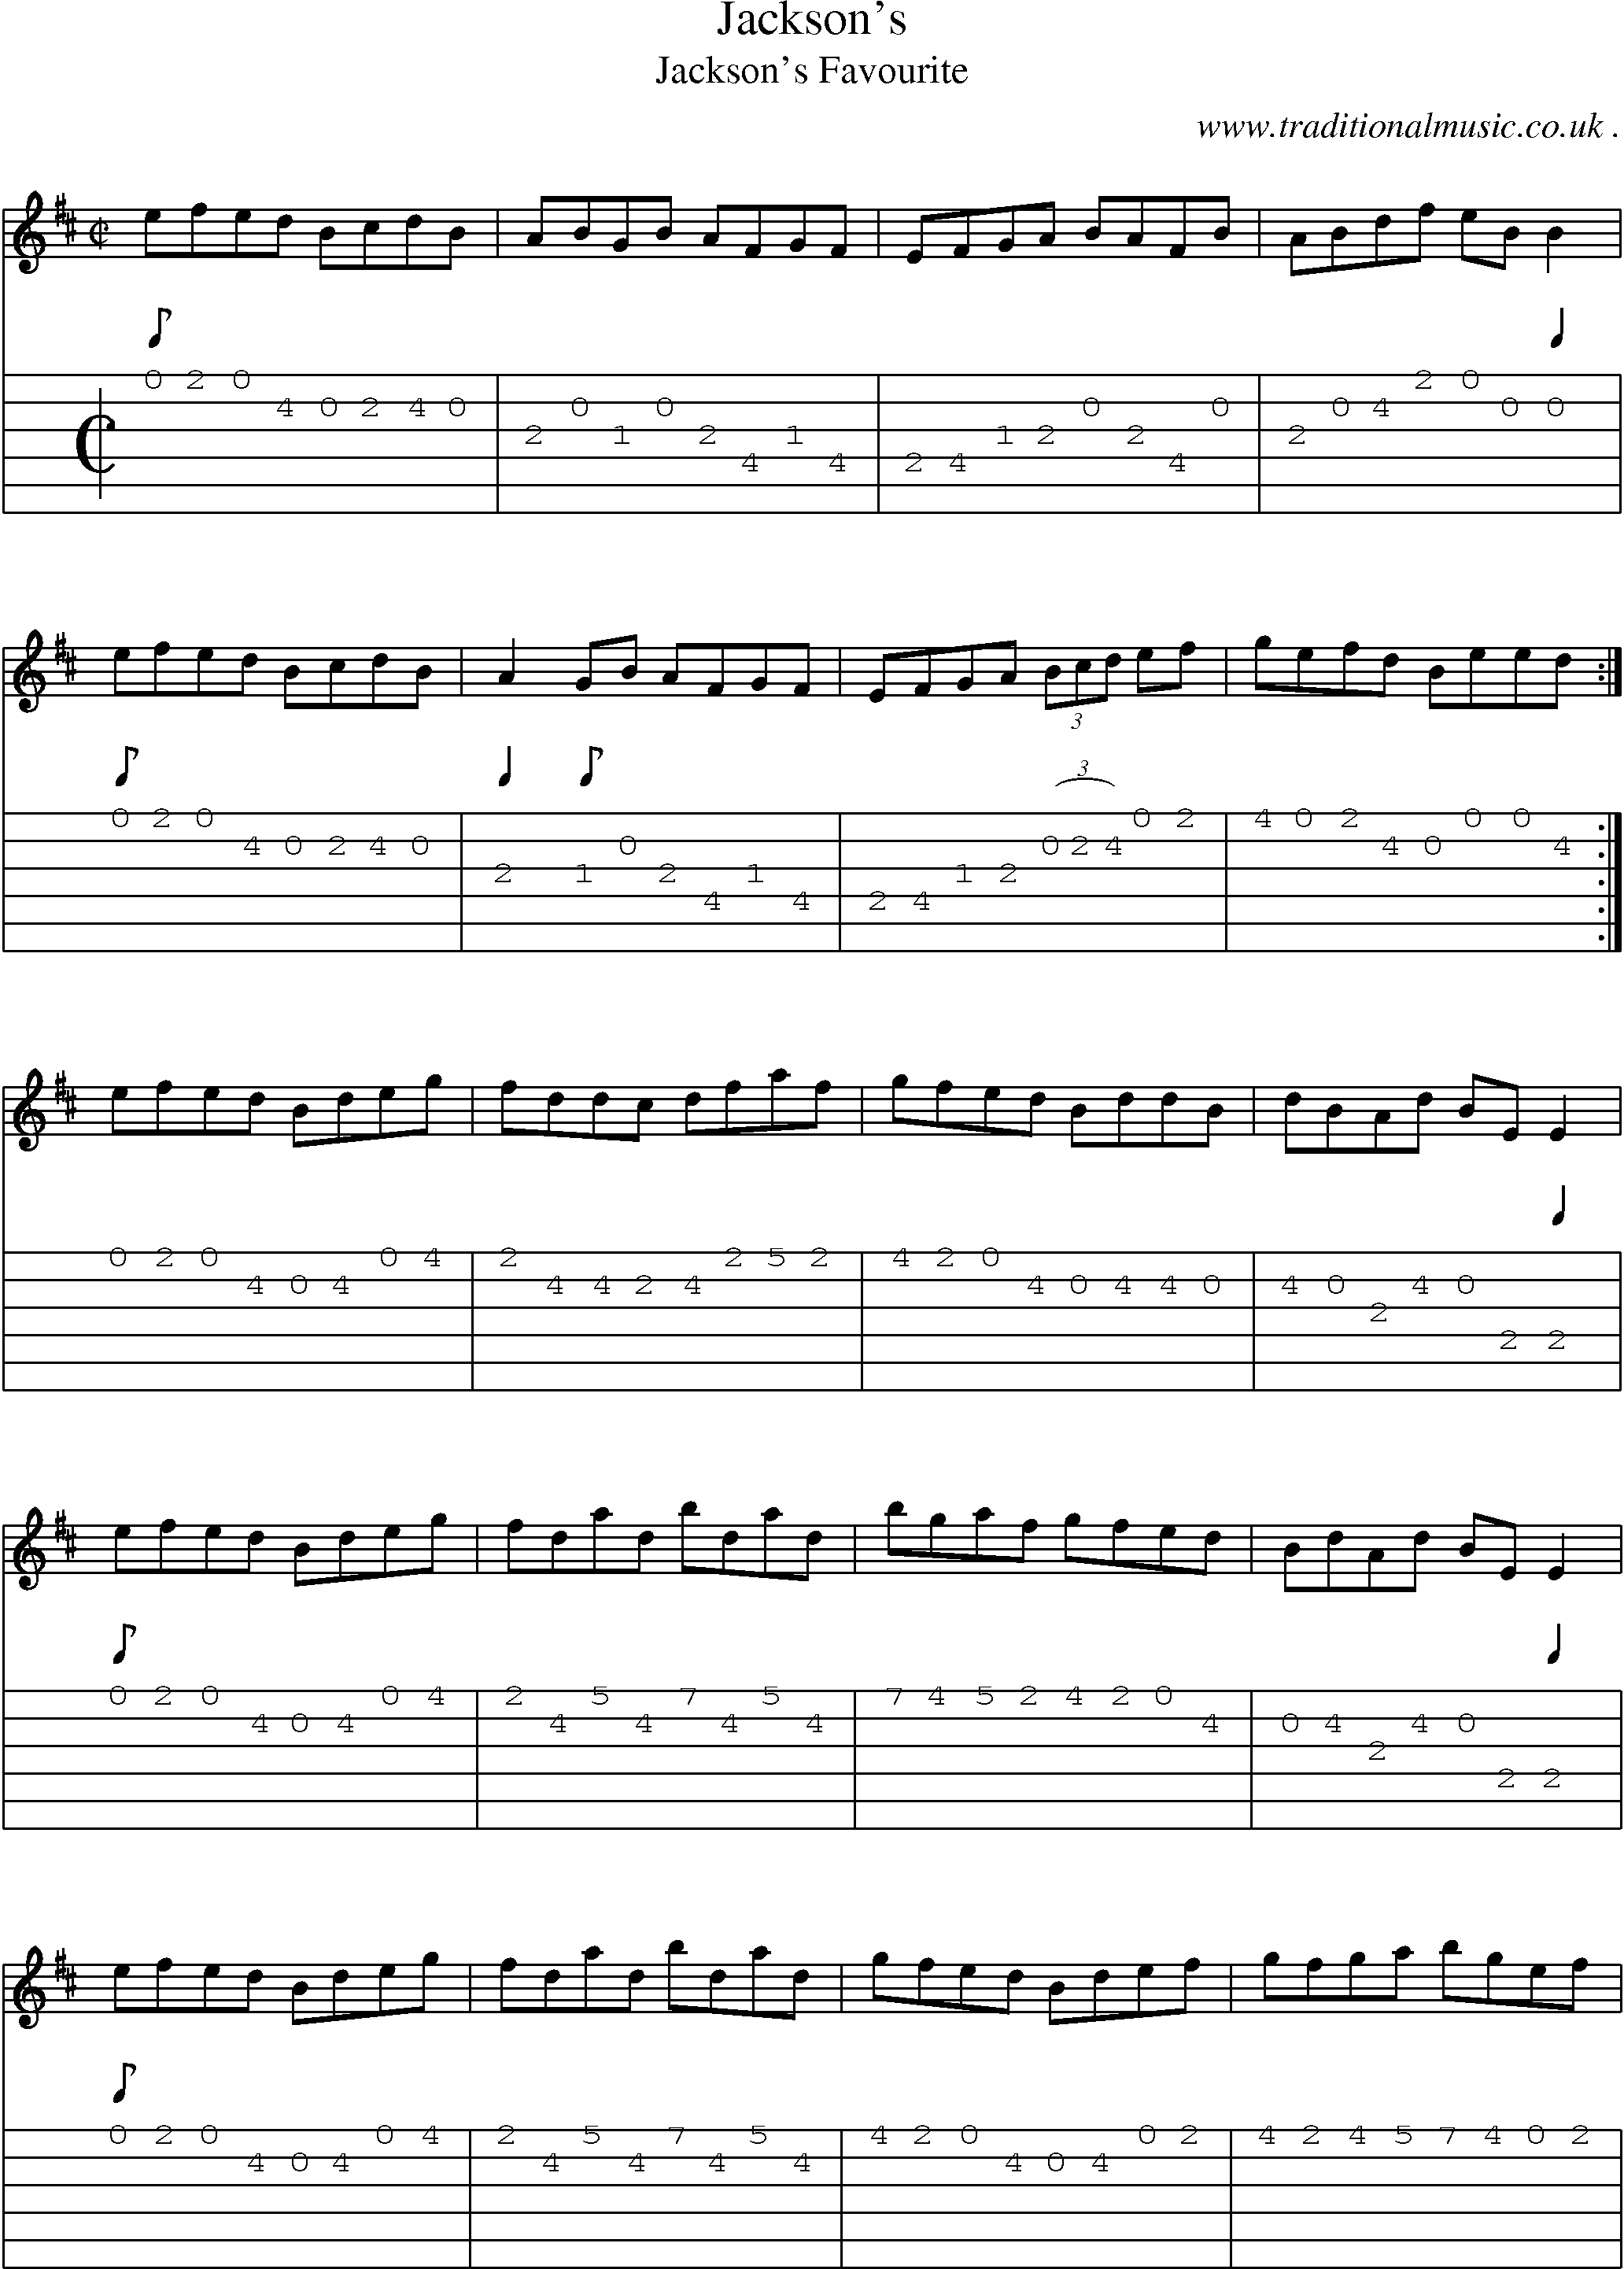 Sheet-Music and Guitar Tabs for Jackson